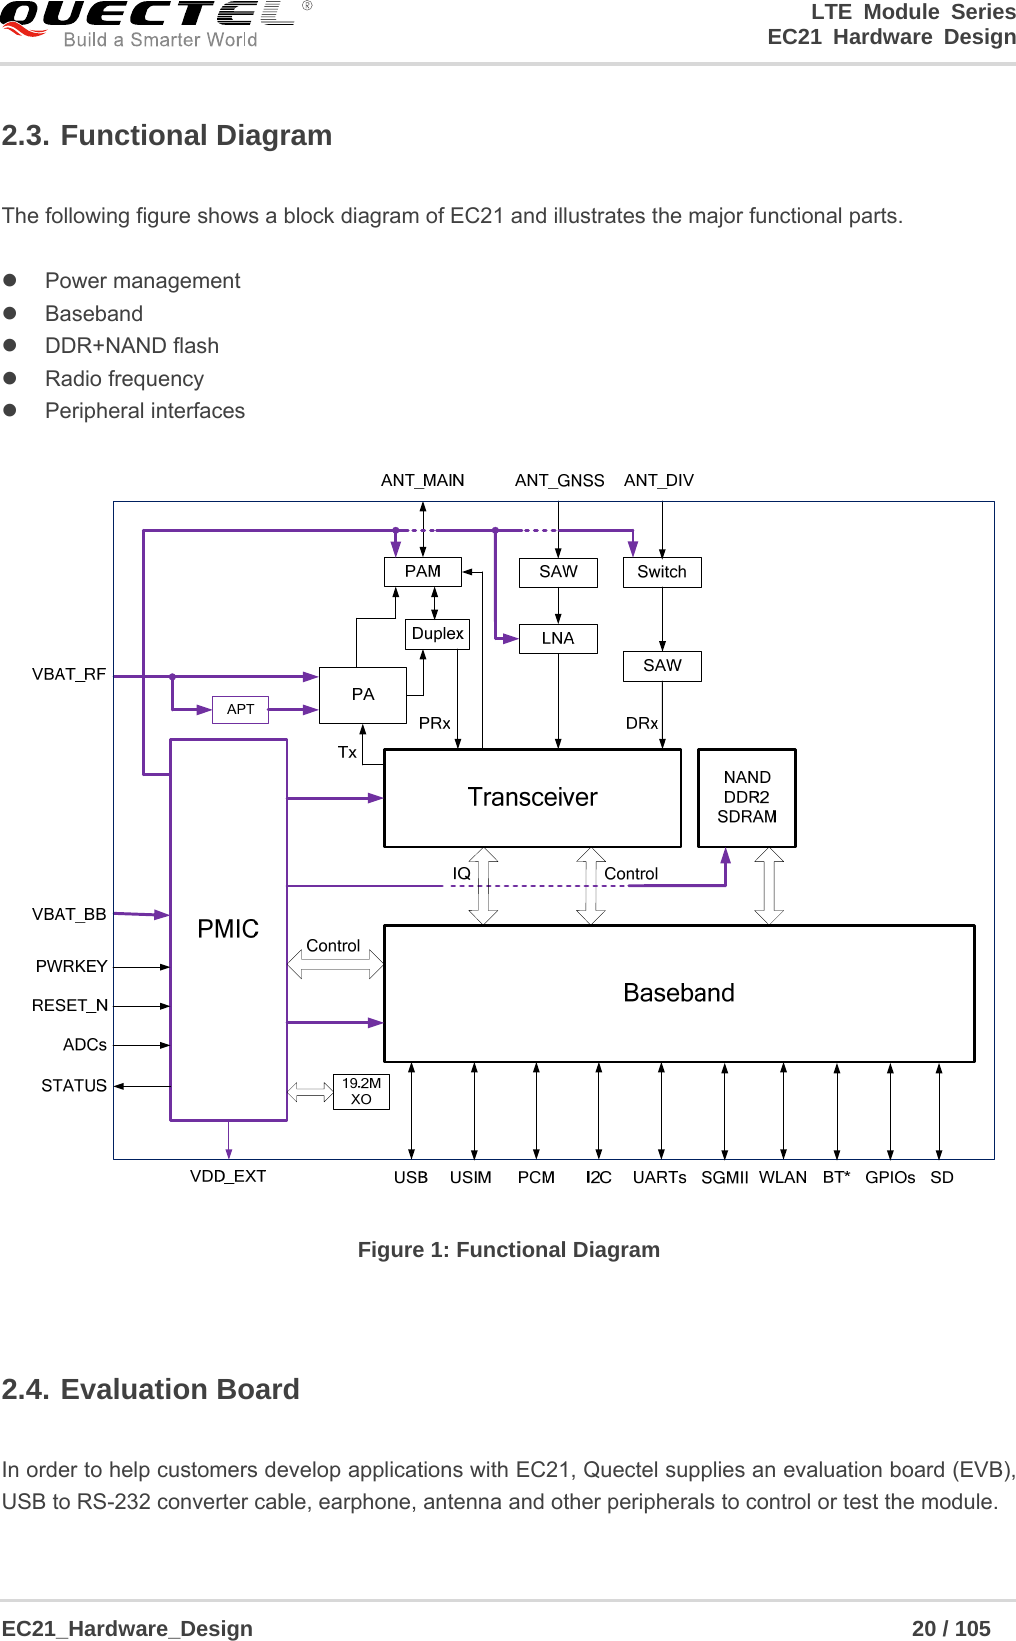                                                                        LTE Module Series                                                                 EC21 Hardware Design  EC21_Hardware_Design                                                            20 / 105    2.3. Functional Diagram  The following figure shows a block diagram of EC21 and illustrates the major functional parts.     Power management  Baseband  DDR+NAND flash  Radio frequency   Peripheral interfaces  Figure 1: Functional Diagram  2.4. Evaluation Board  In order to help customers develop applications with EC21, Quectel supplies an evaluation board (EVB), USB to RS-232 converter cable, earphone, antenna and other peripherals to control or test the module.